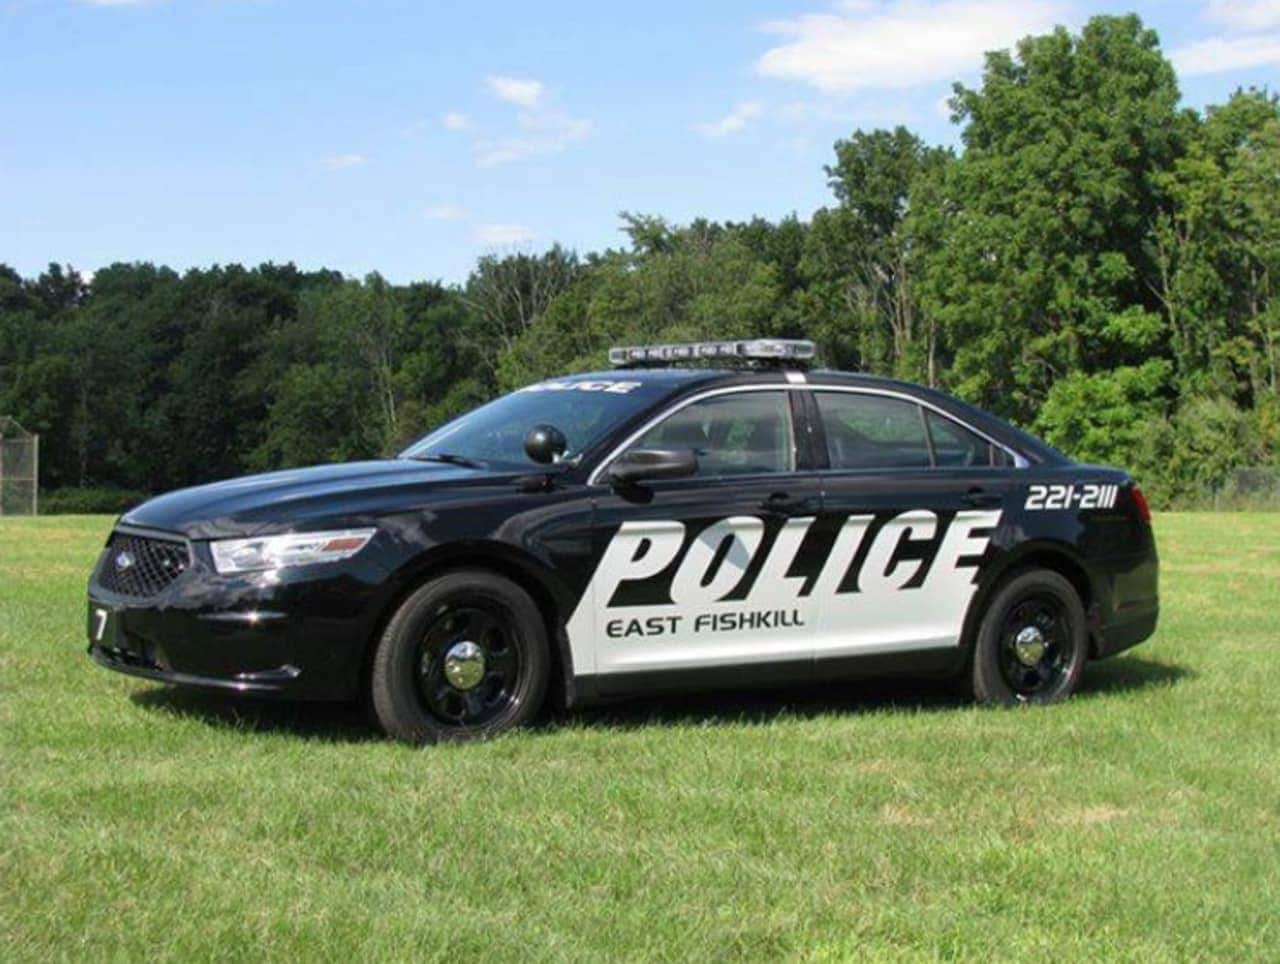 The East Fishkill Police Department.